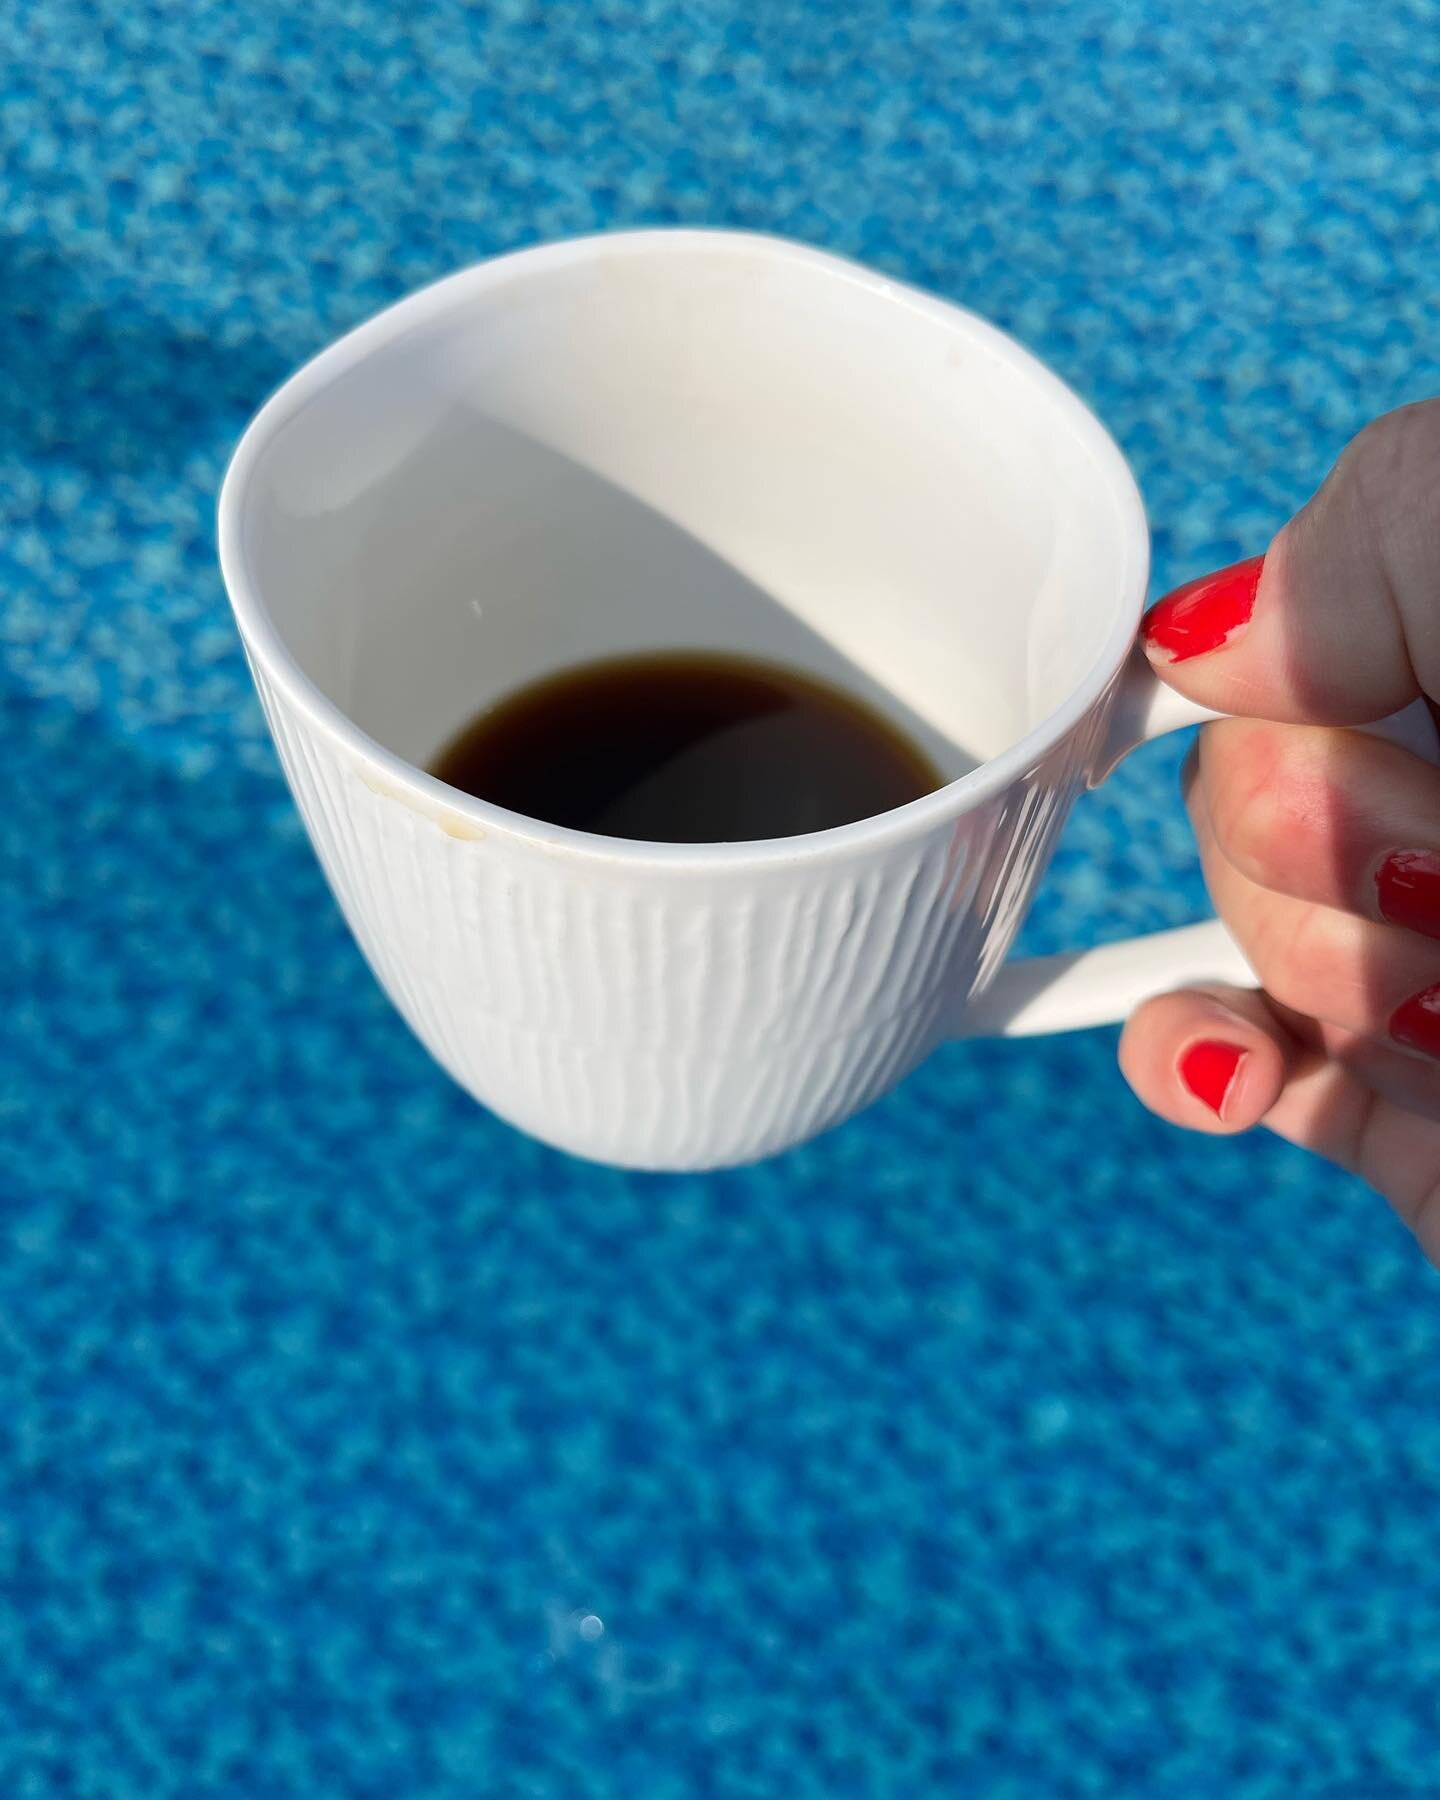 Cold plunges and hot coffee. 
The pool is open early!
🌊